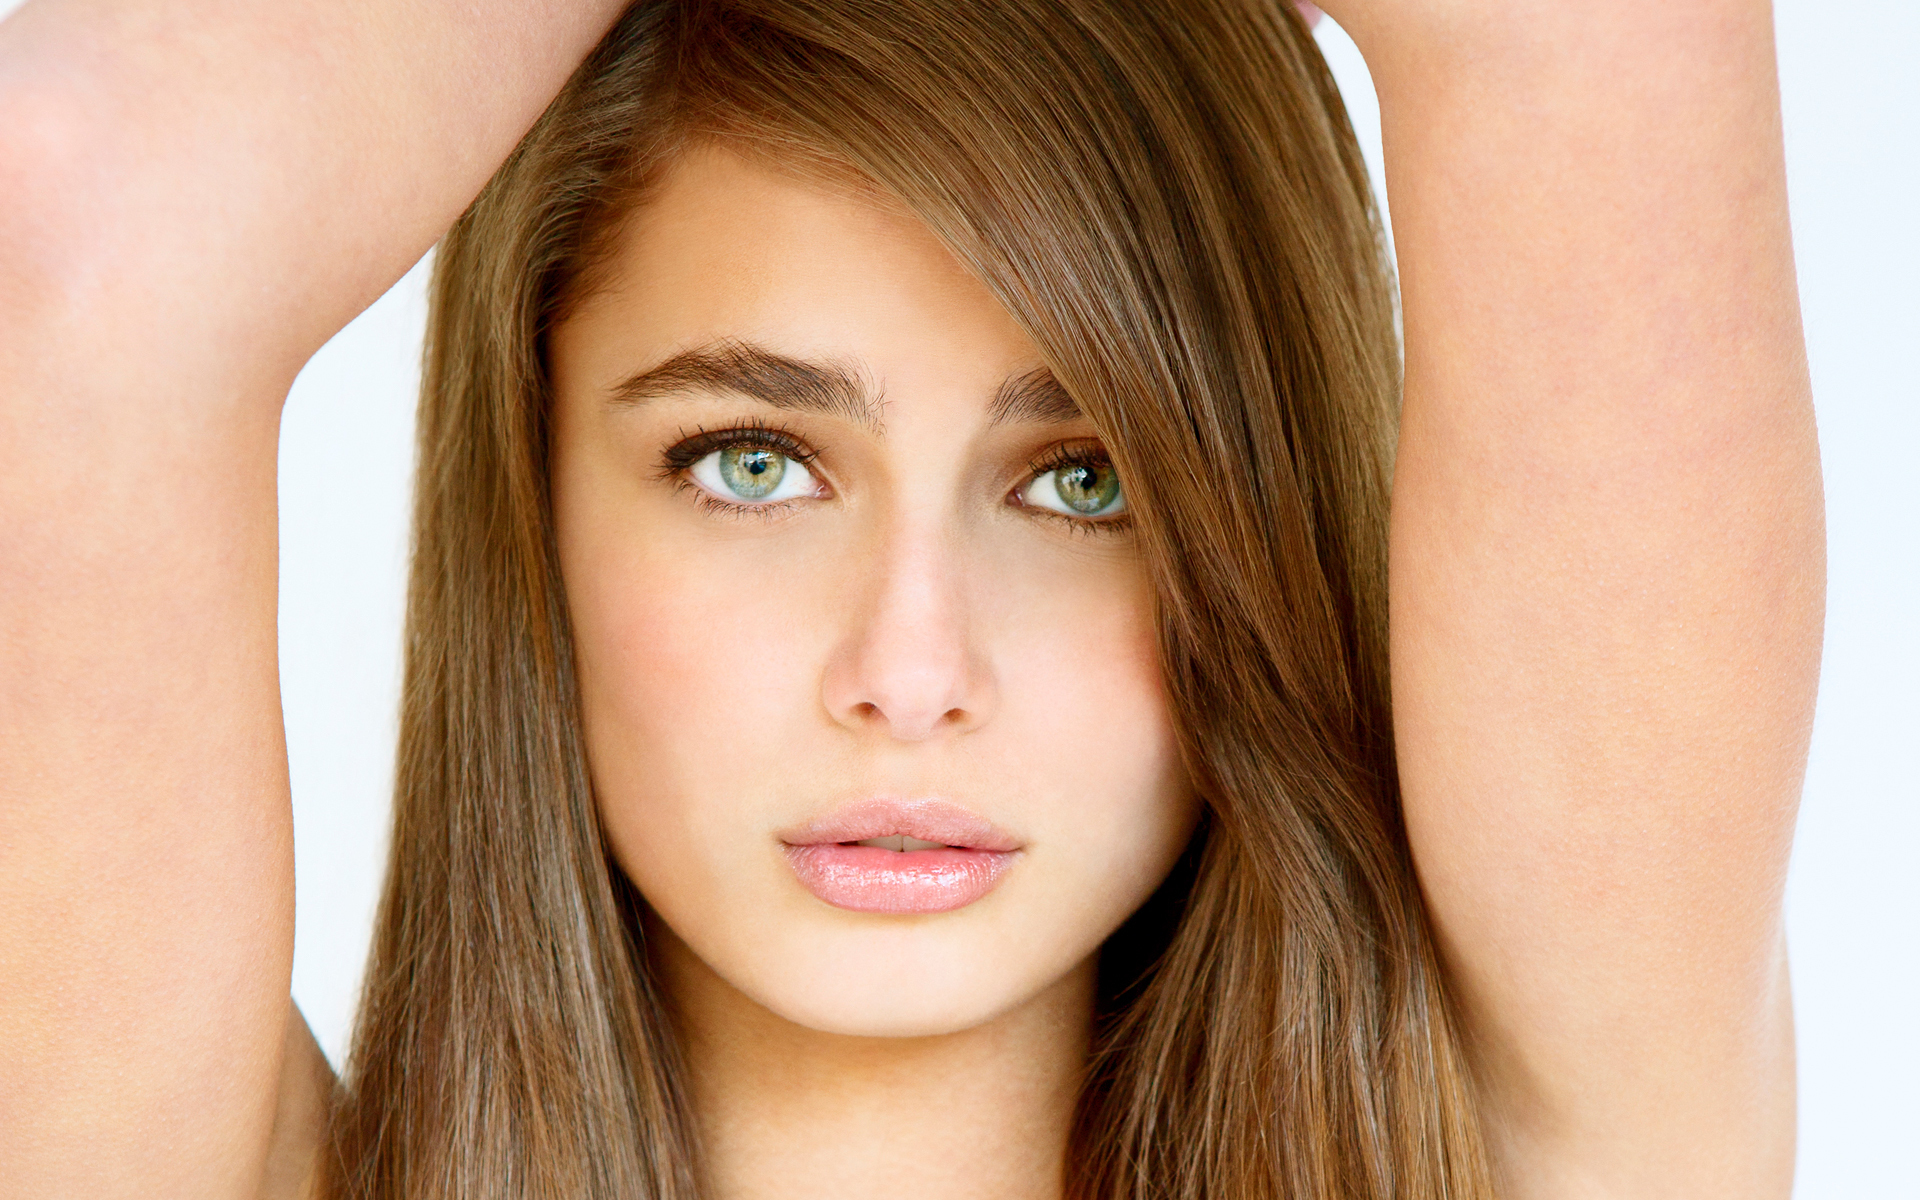 Taylor Hill Wallpaper Image Photos Pictures Background